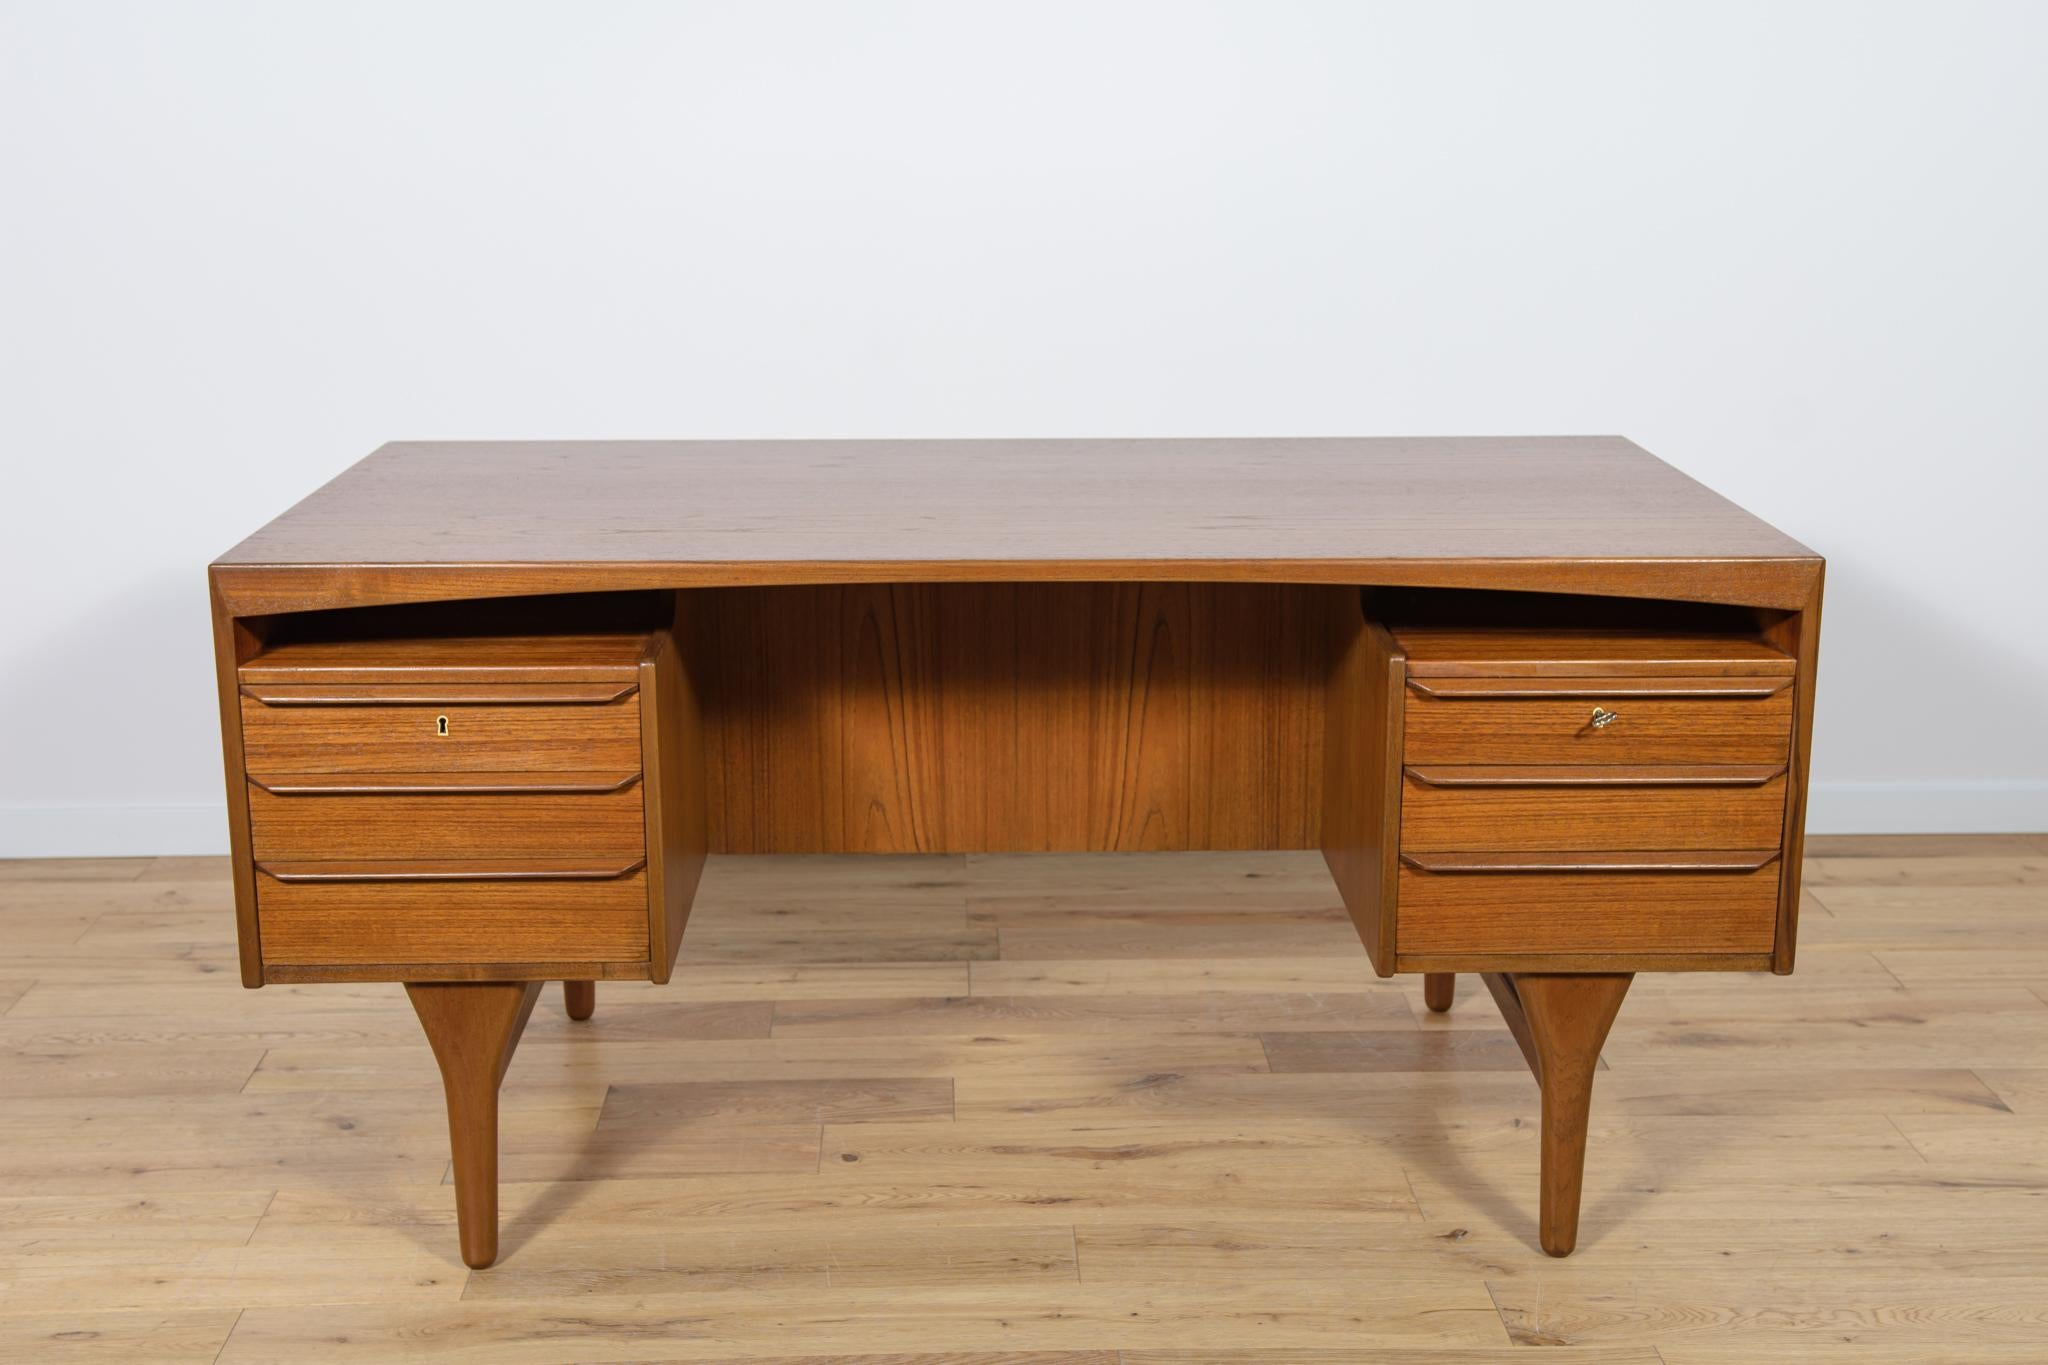 The desk designed by Valdemar Mortensen, produced in Denmark in the 1960s. The desk is made of teak wood and is free-standing. There are two modules at the front - three drawers each. At the front there is a bookshelf and a lockable cabinet. The